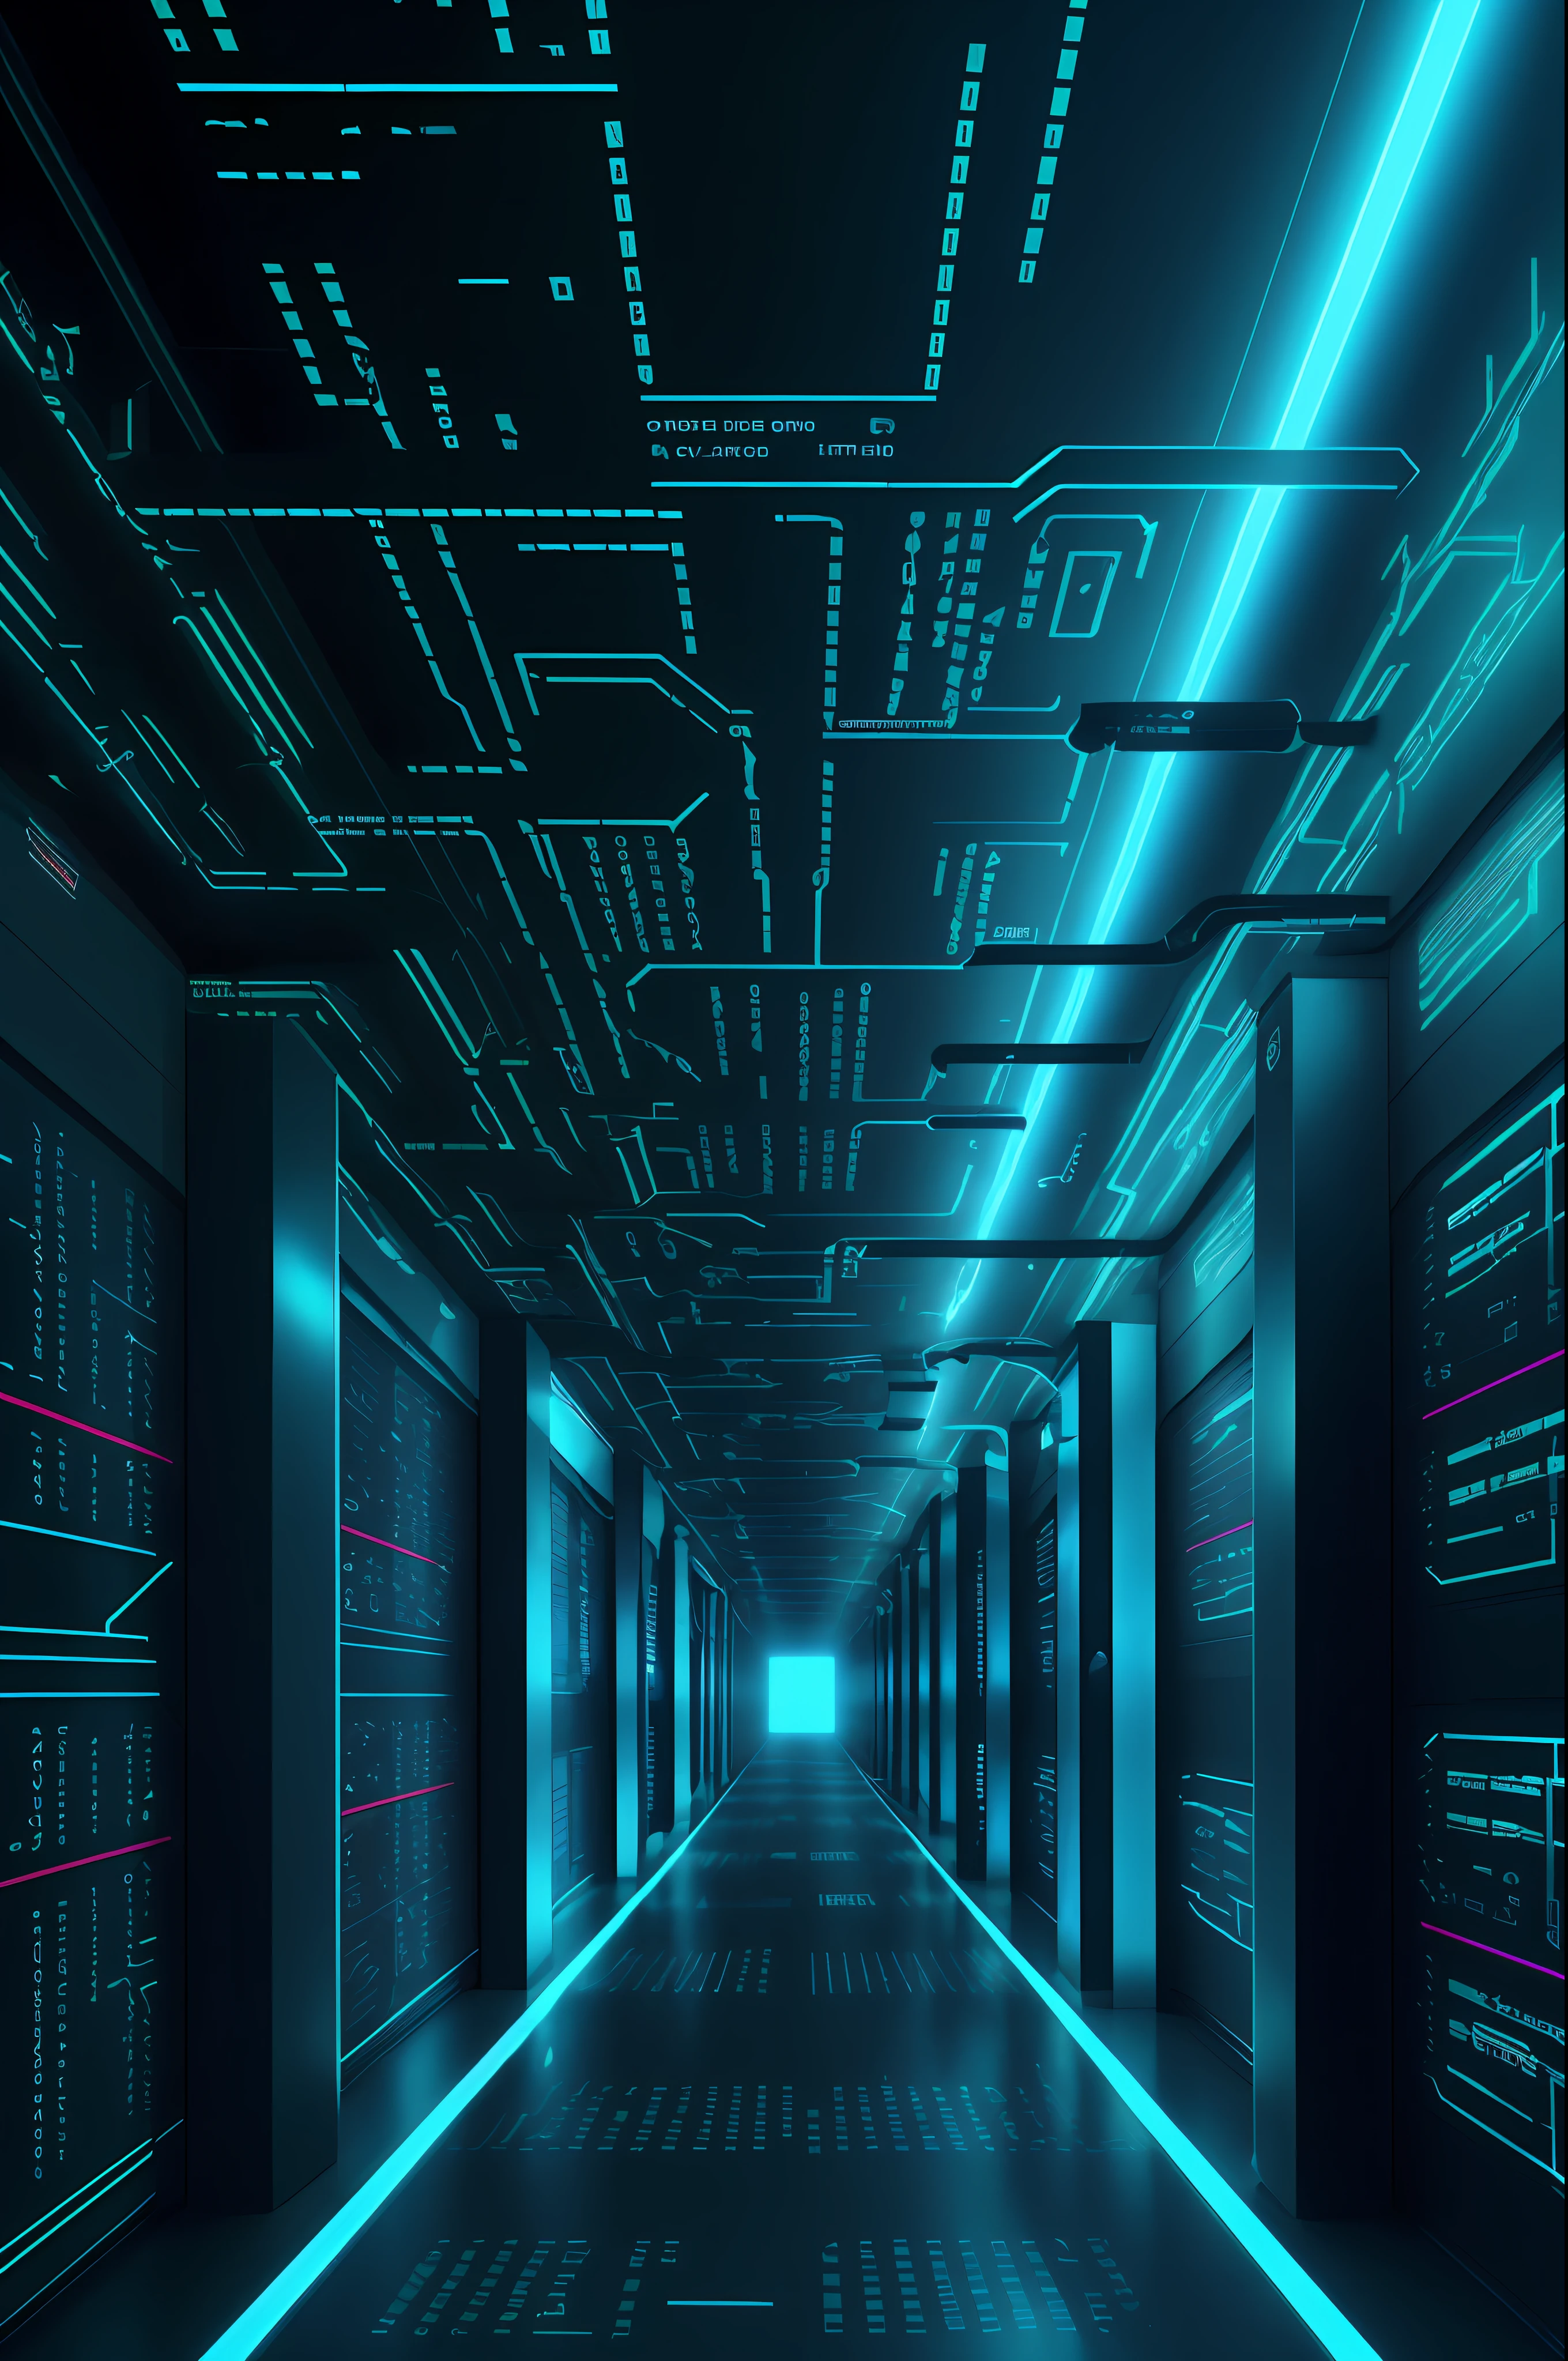 Cyberspace, a long corridor, storage grids, codes